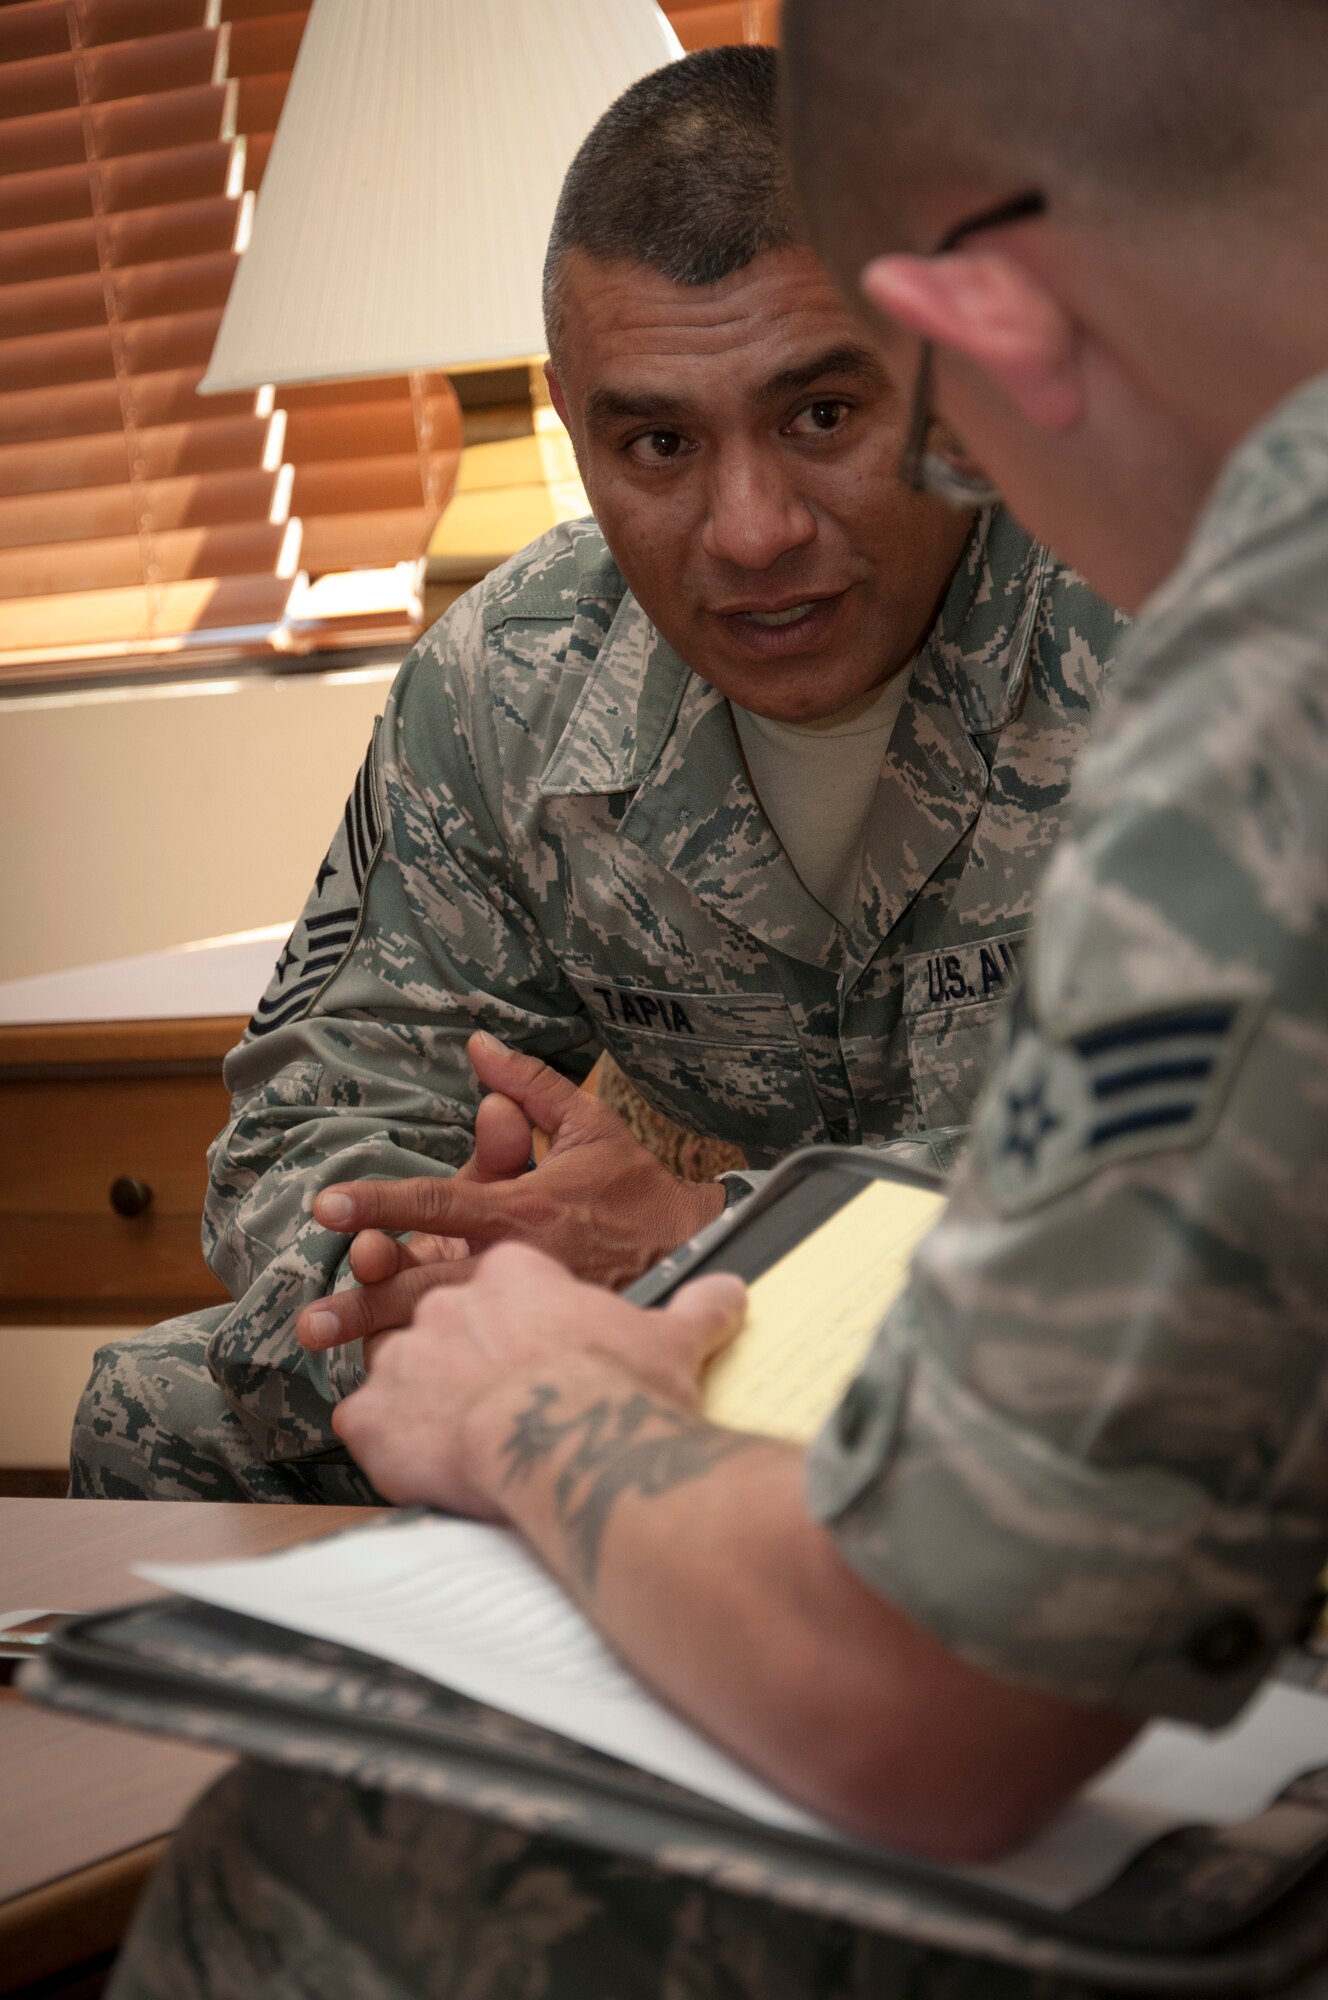 Chief Master Sgt. Gerardo Tapia, Air Education and Training Command command chief, participates in an interview at Laughlin Air Force Base, Texas, May 16, 2013. Tapia met with several airmen and spoke at two different Enlisted All Calls while visiting Laughlin. (U.S. Air Force photo/Airman 1st Class John D. Partlow)